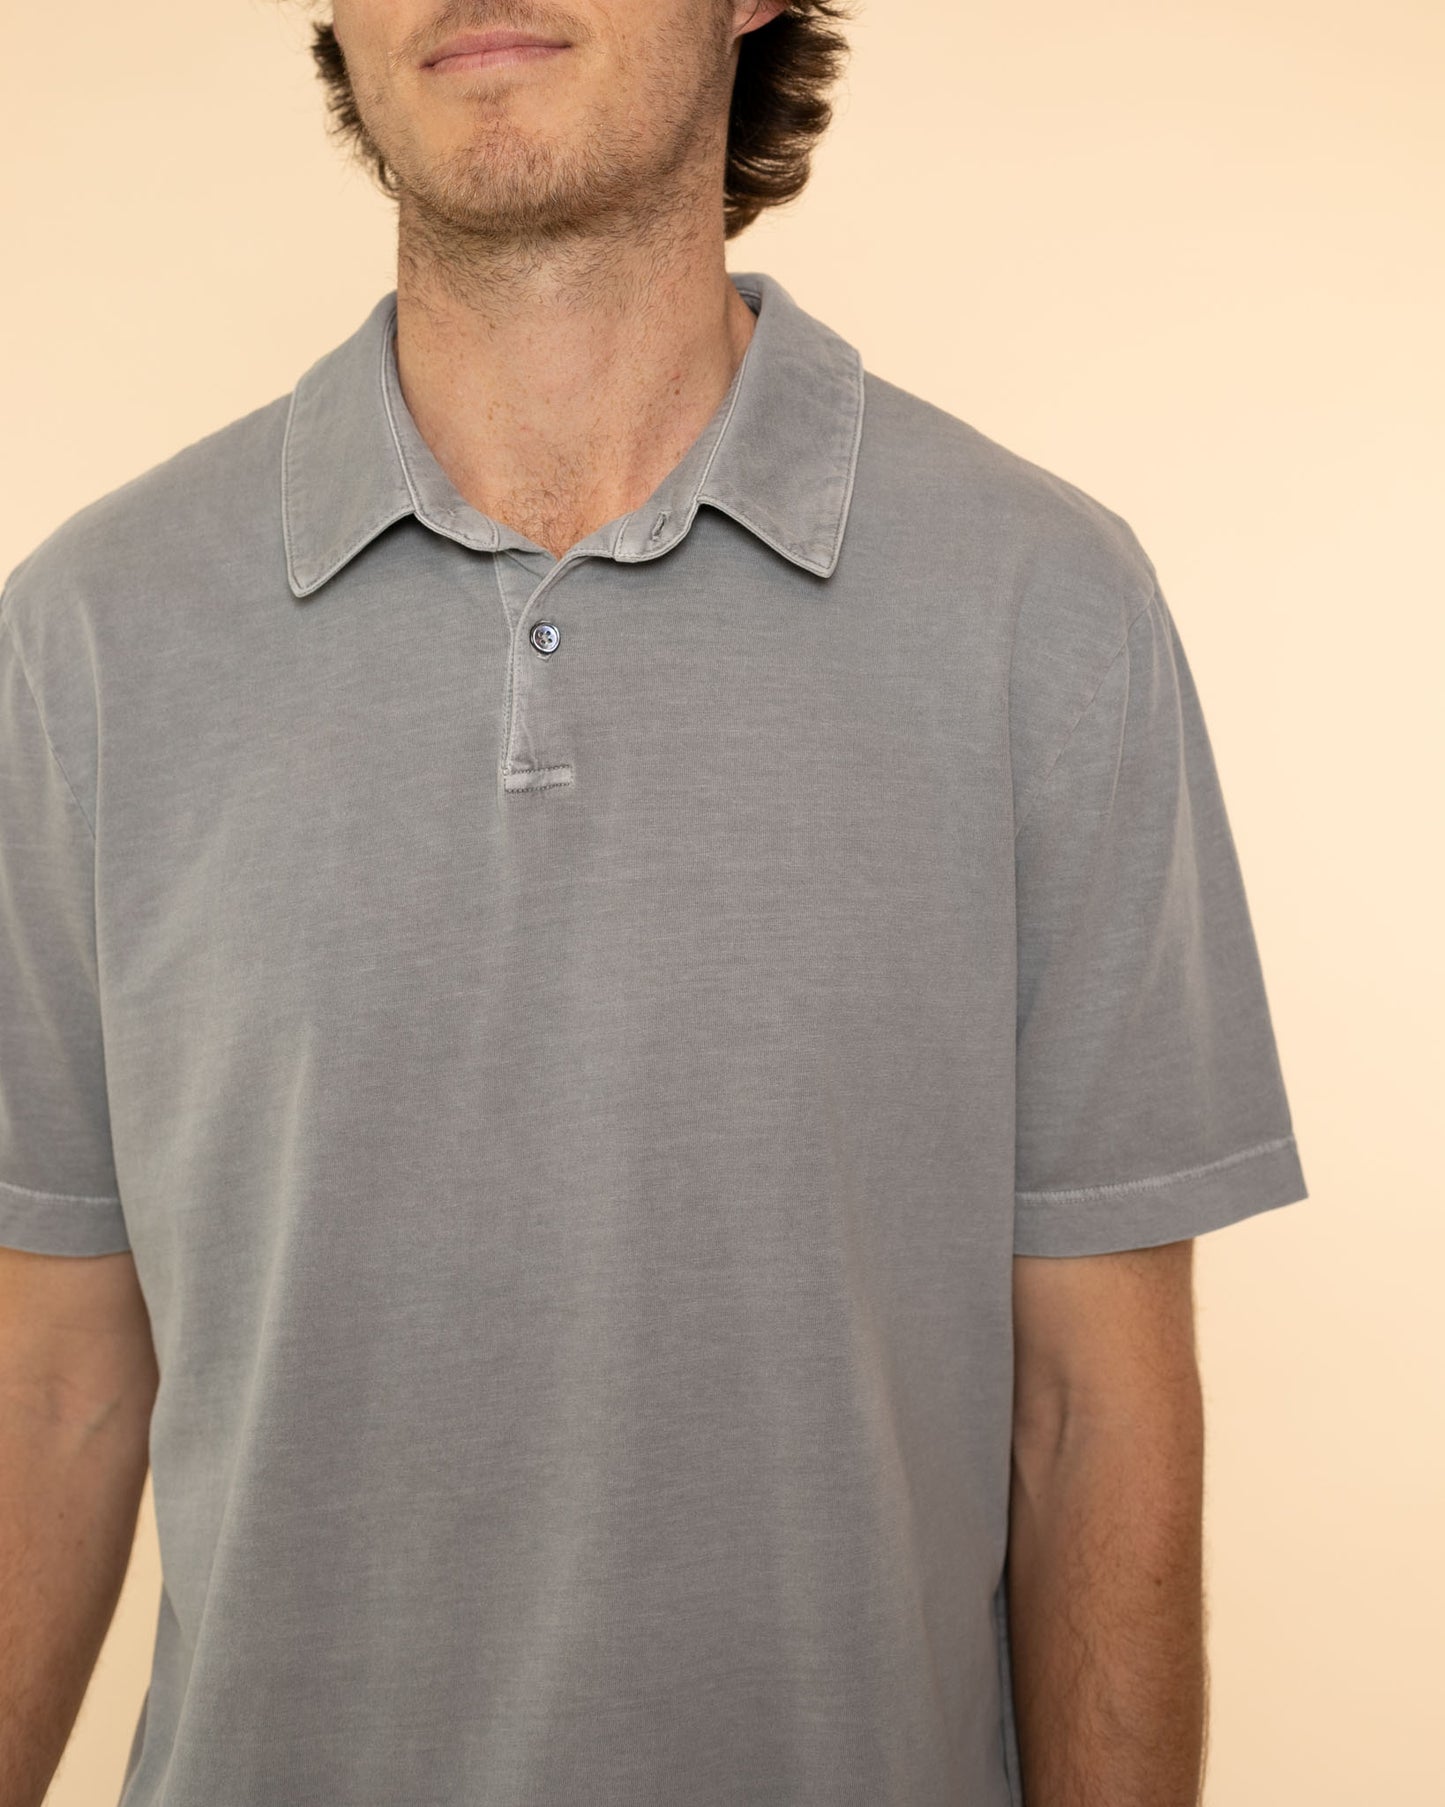 Revised Standard Polo | Silver Grey Pigment